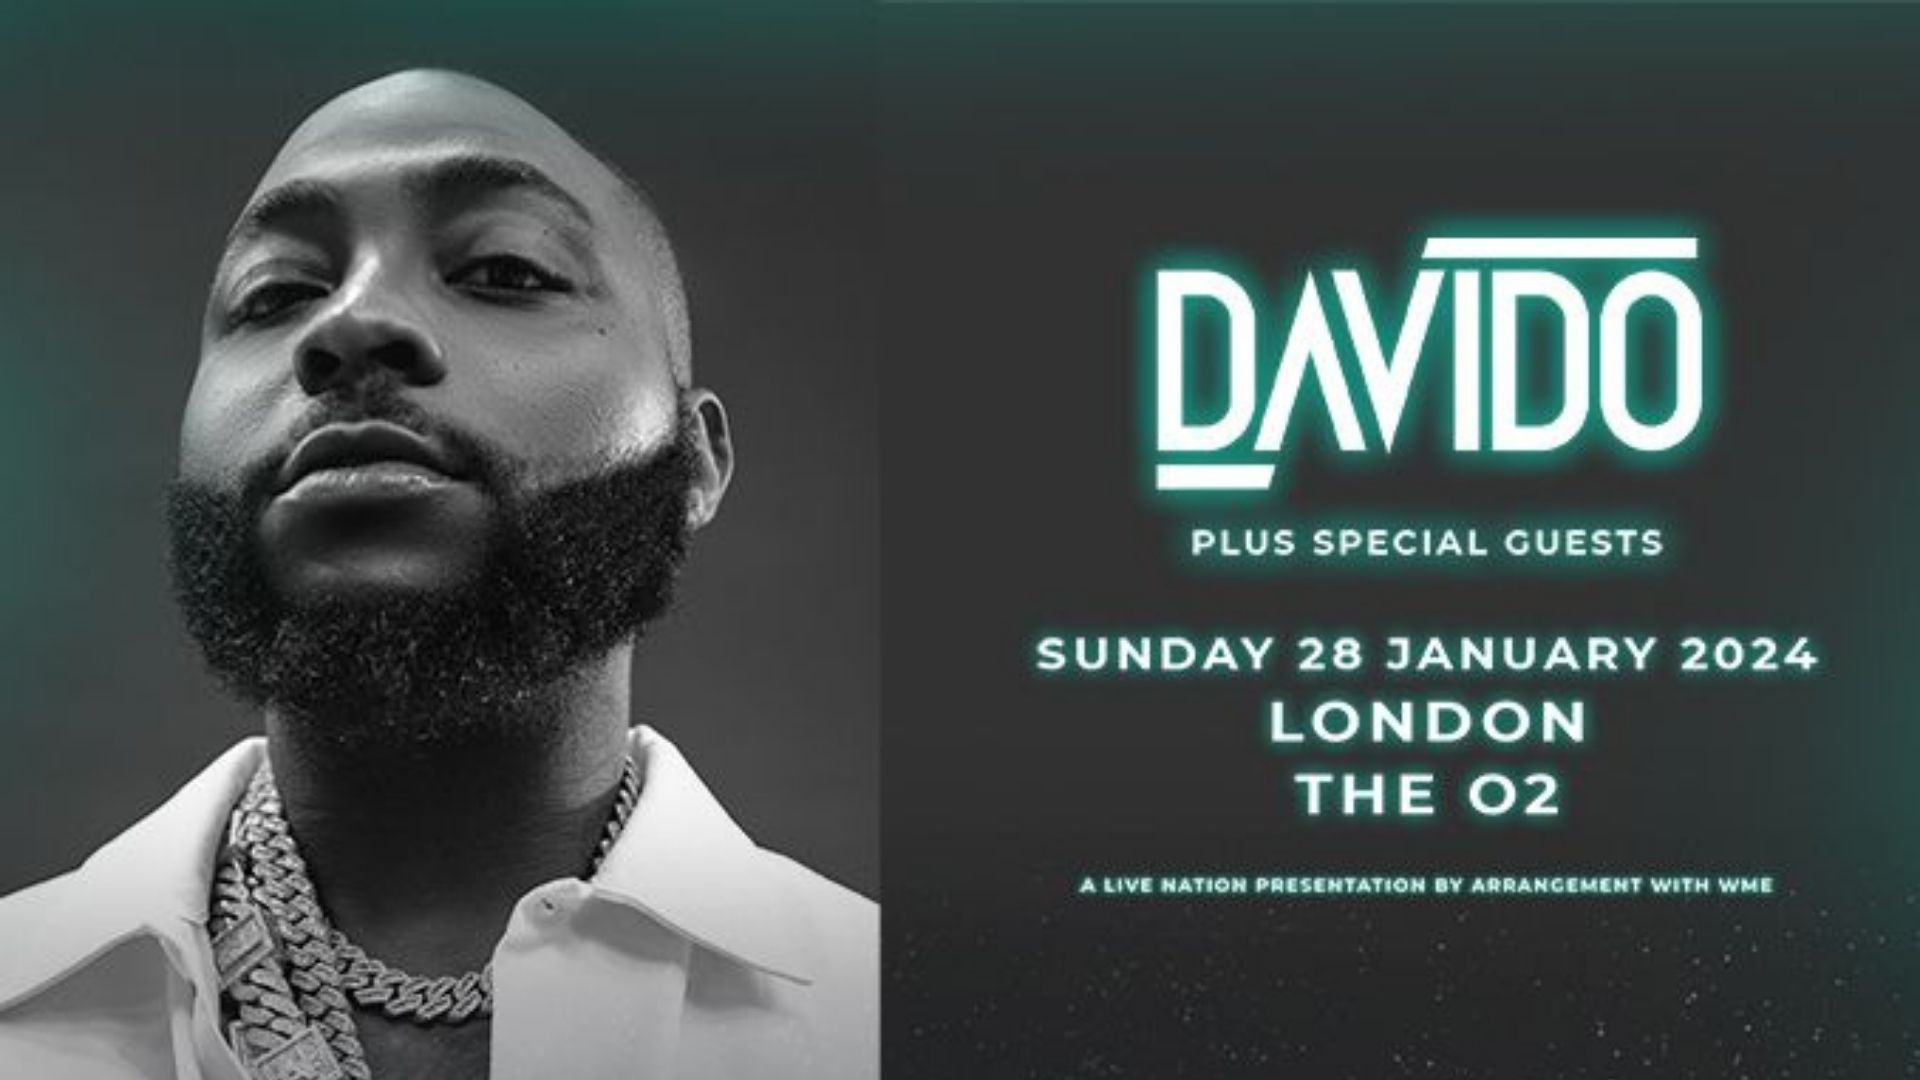 The Davido Timeless tour boasts an impressive lineup of artists from around the world on stage the biggest names in the music industry,